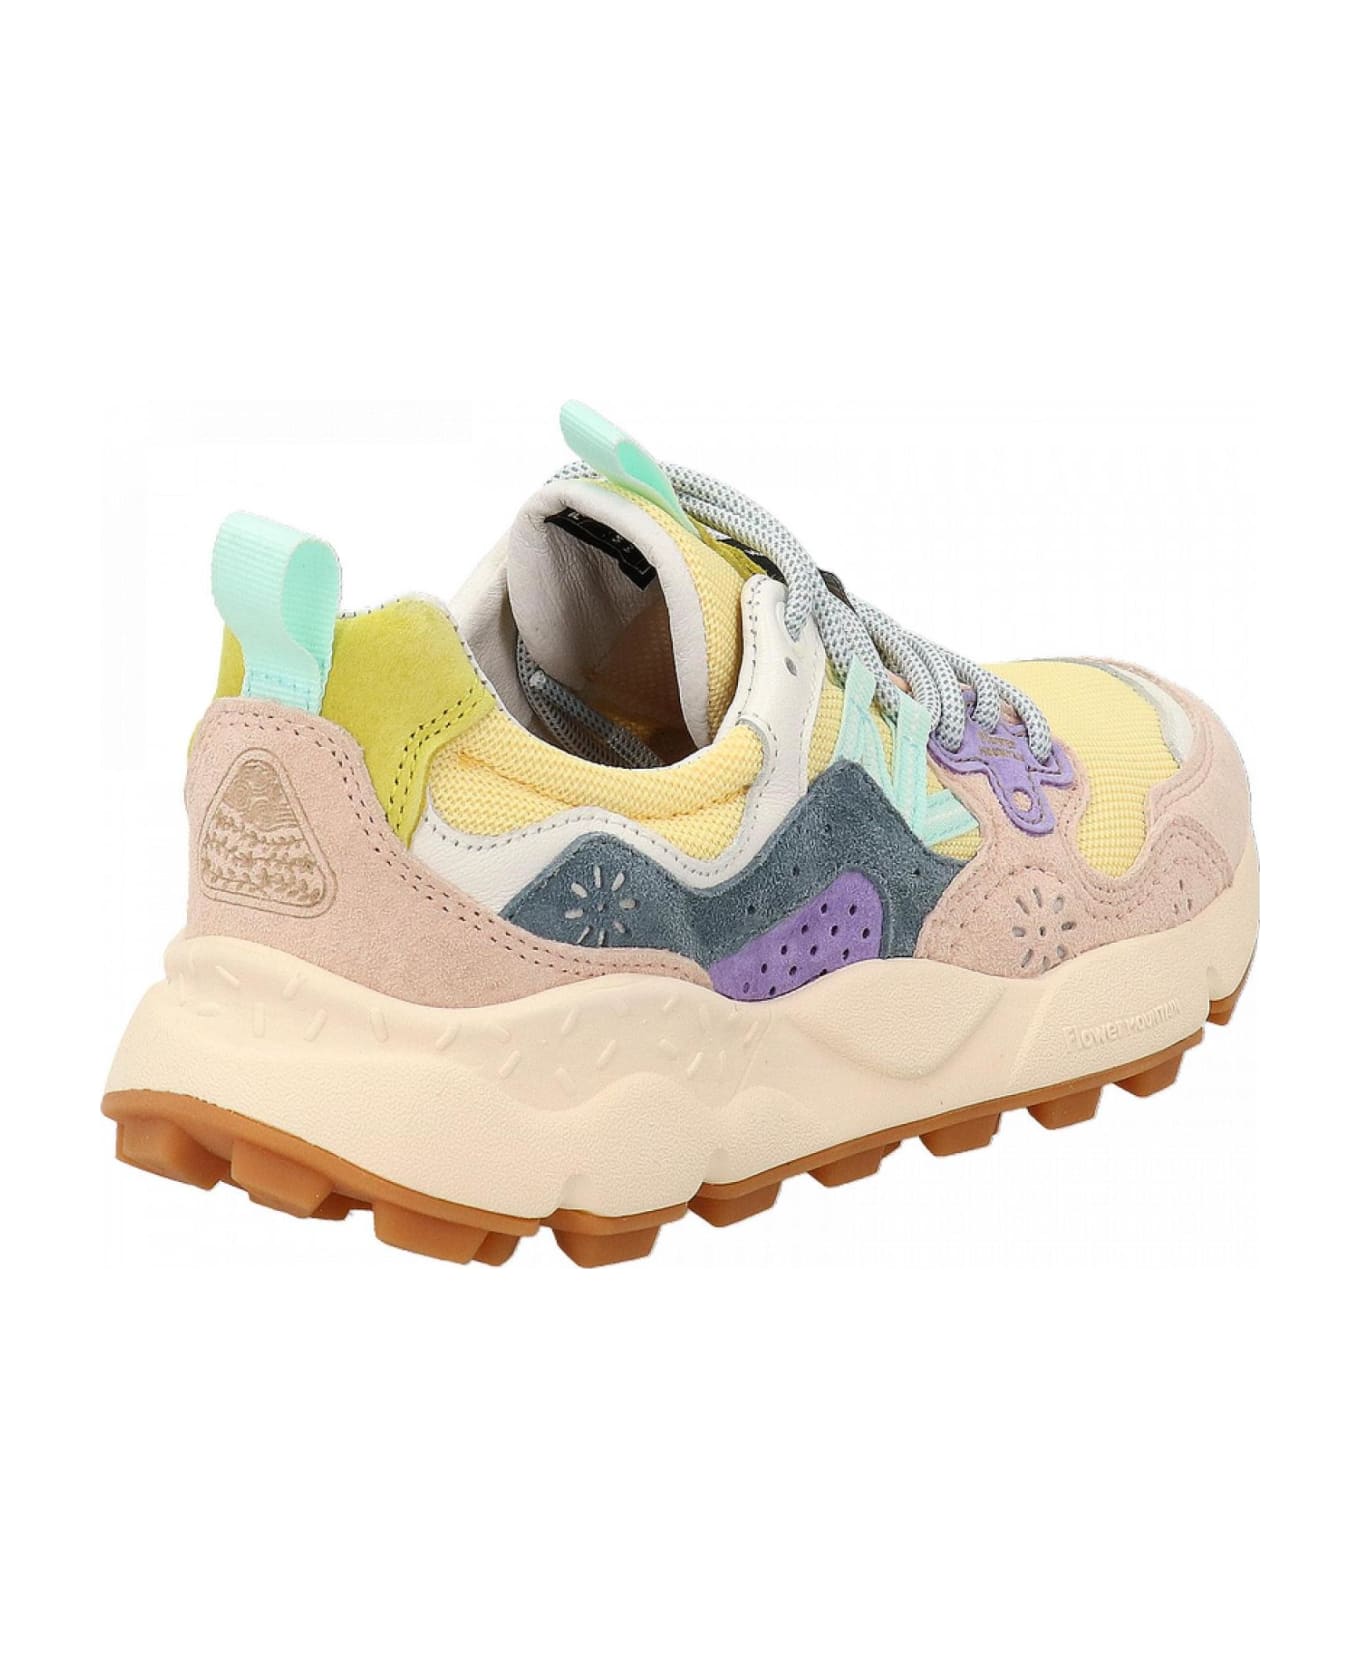 Flower Mountain Yamano3 Sneakers - Multicolor スニーカー